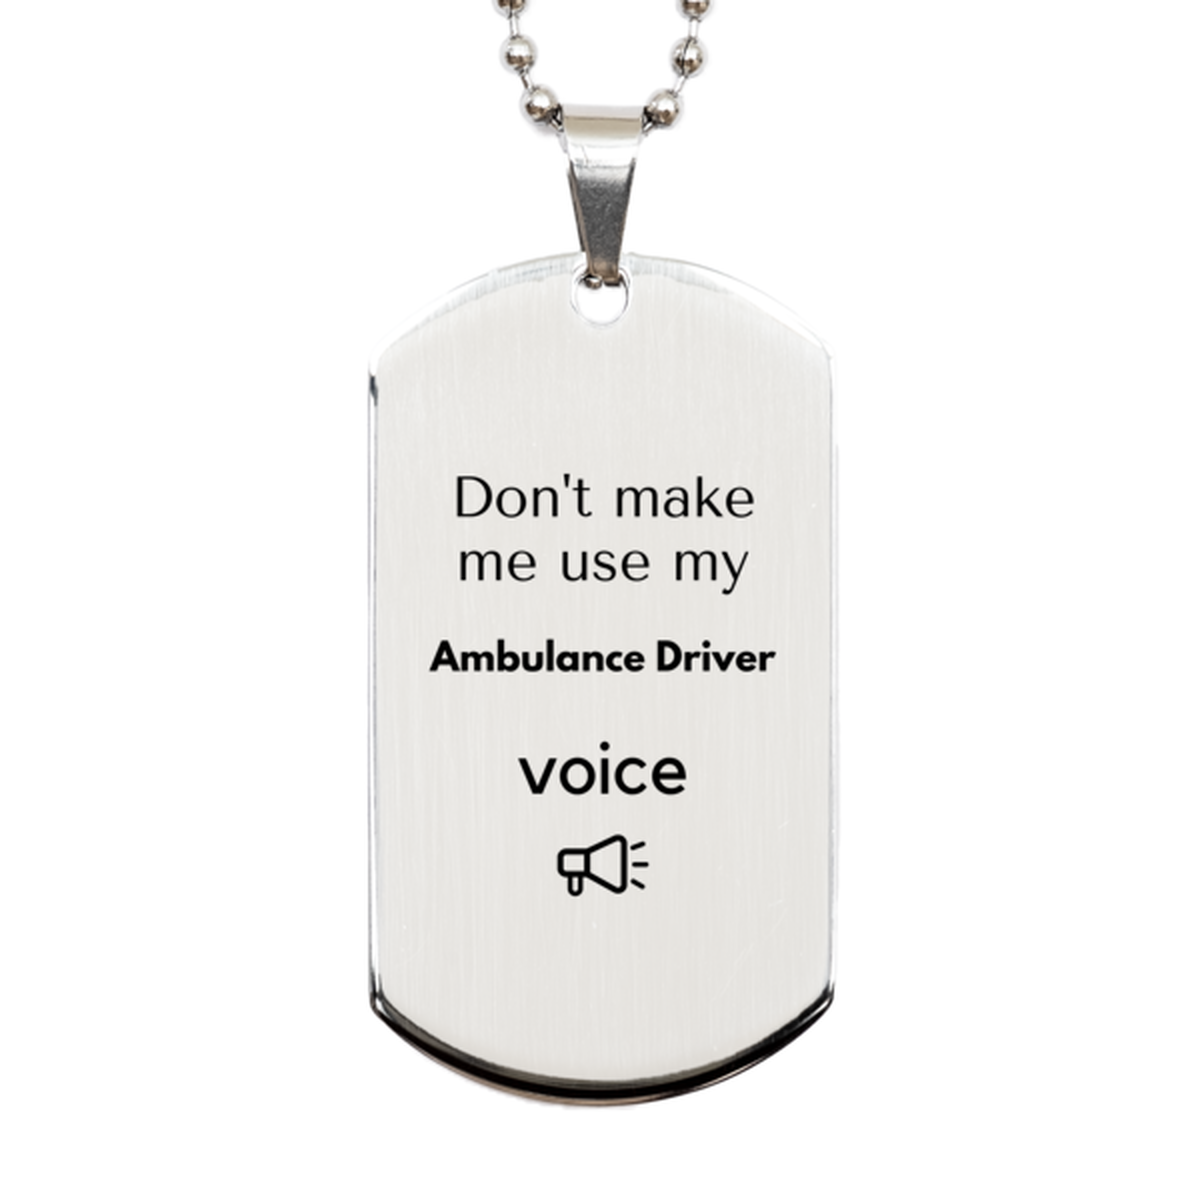 Don't make me use my Ambulance Driver voice, Sarcasm Ambulance Driver Gifts, Christmas Ambulance Driver Silver Dog Tag Birthday Unique Gifts For Ambulance Driver Coworkers, Men, Women, Colleague, Friends